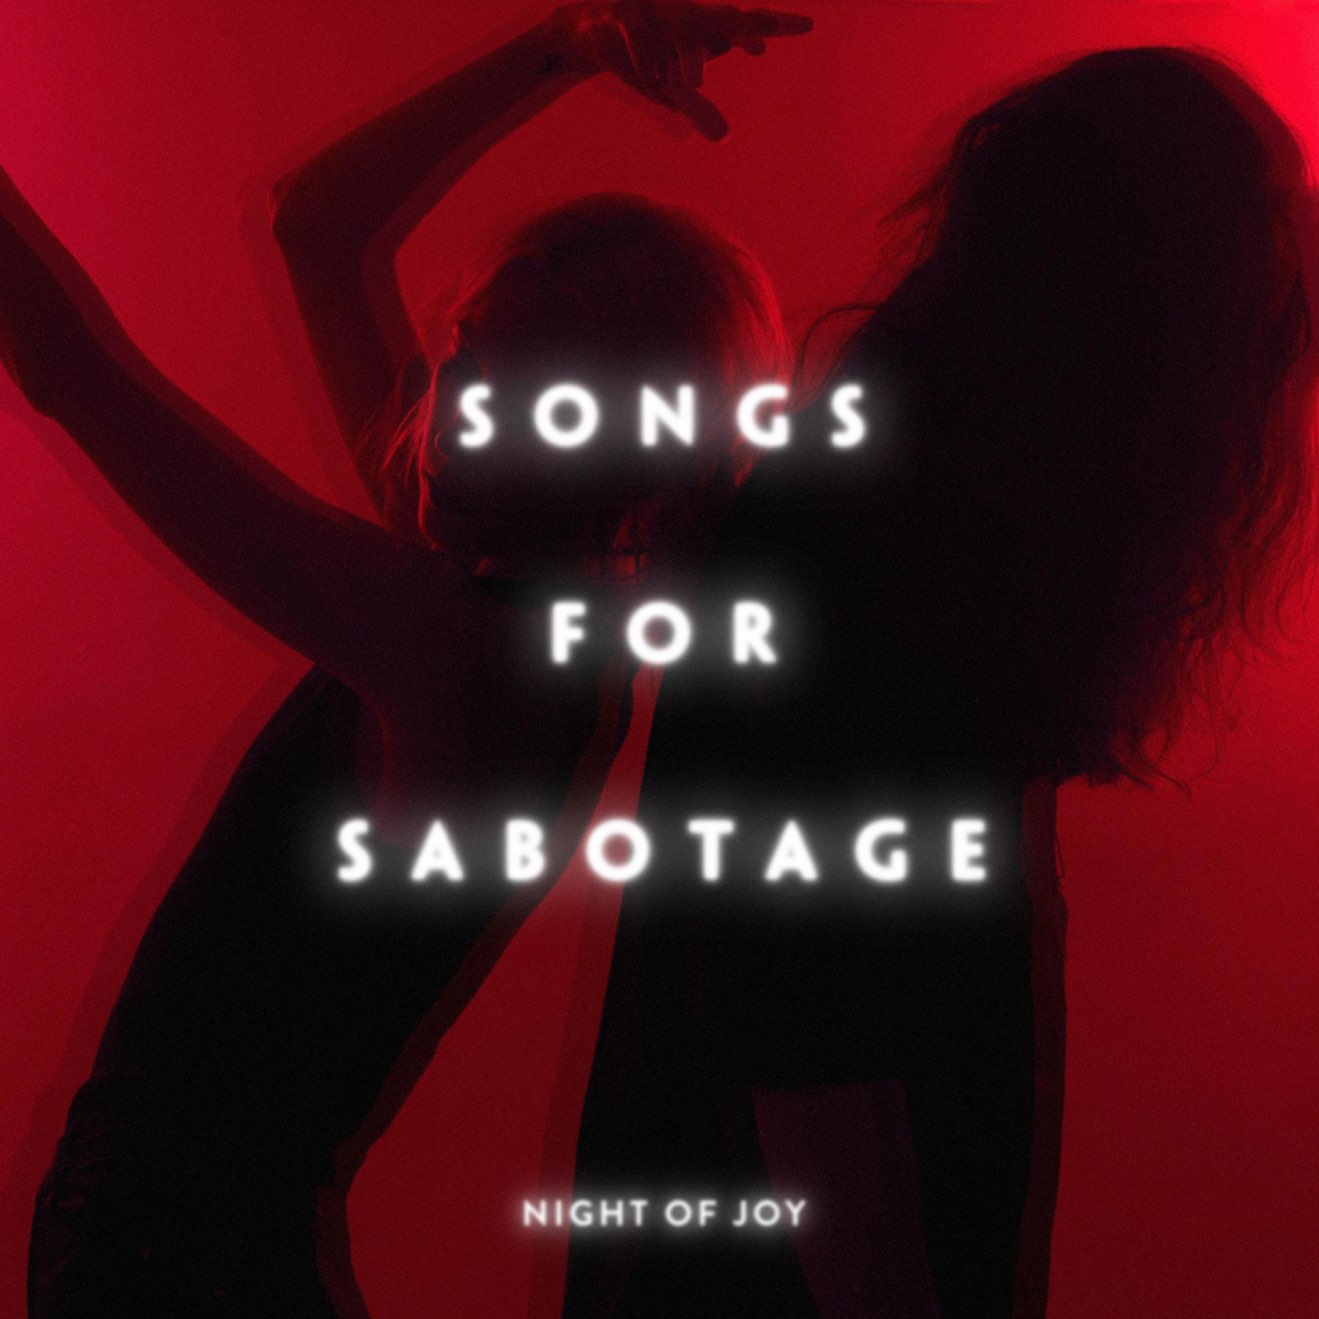 Songs for Sabotage – Night of Joy (2020) [iTunes Match M4A]